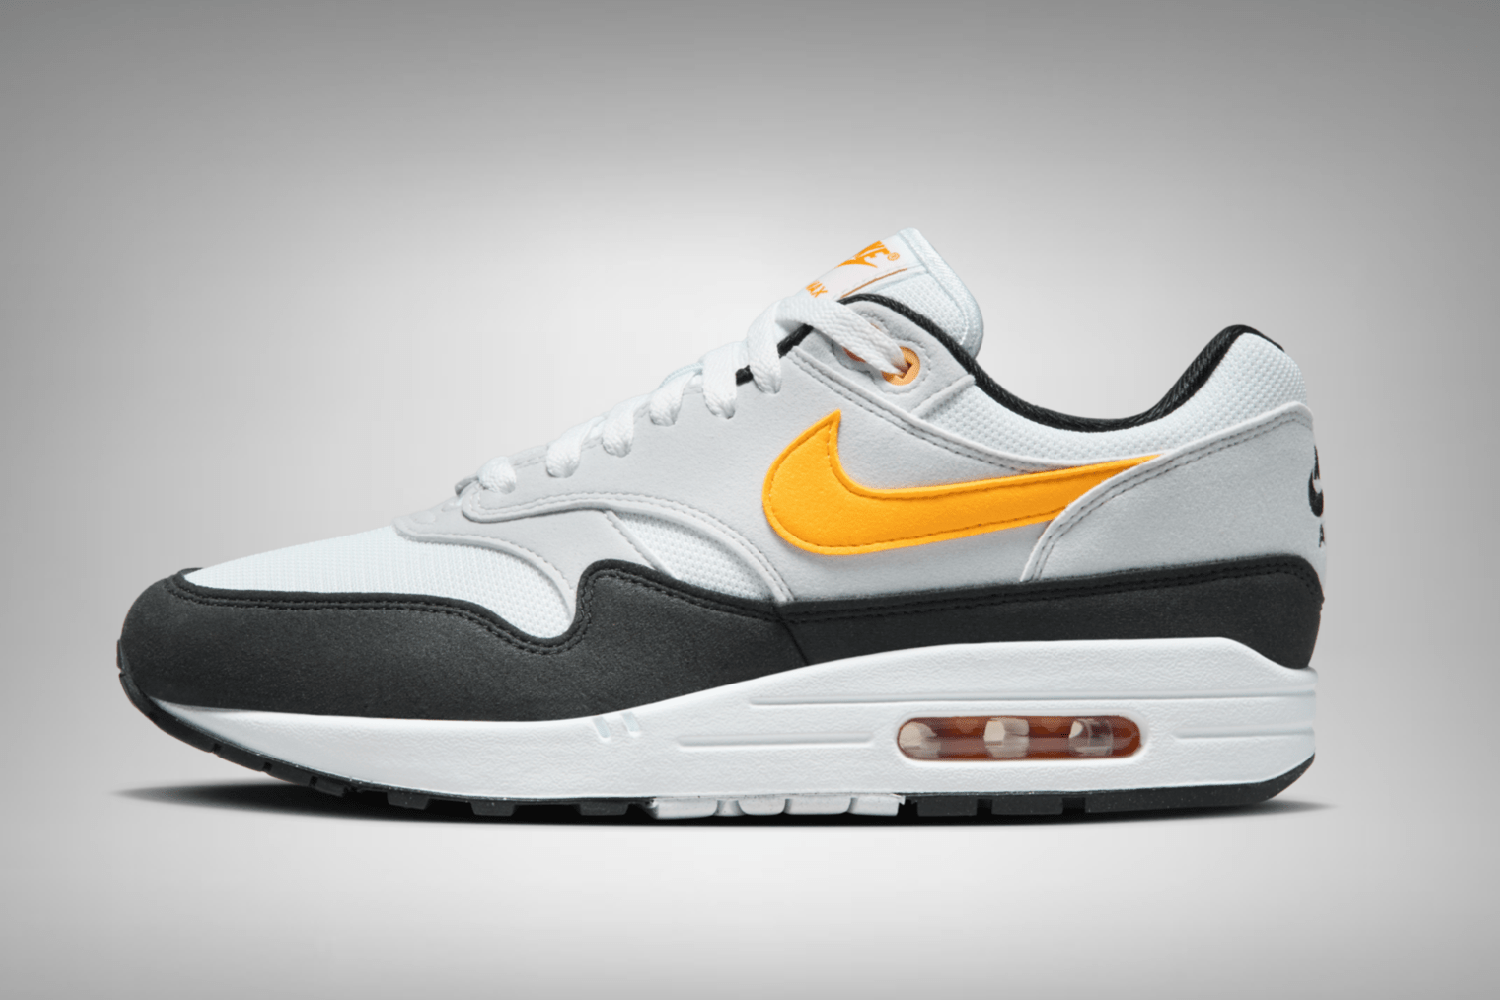 Official images of the Nike Air Max 1 'University Gold'